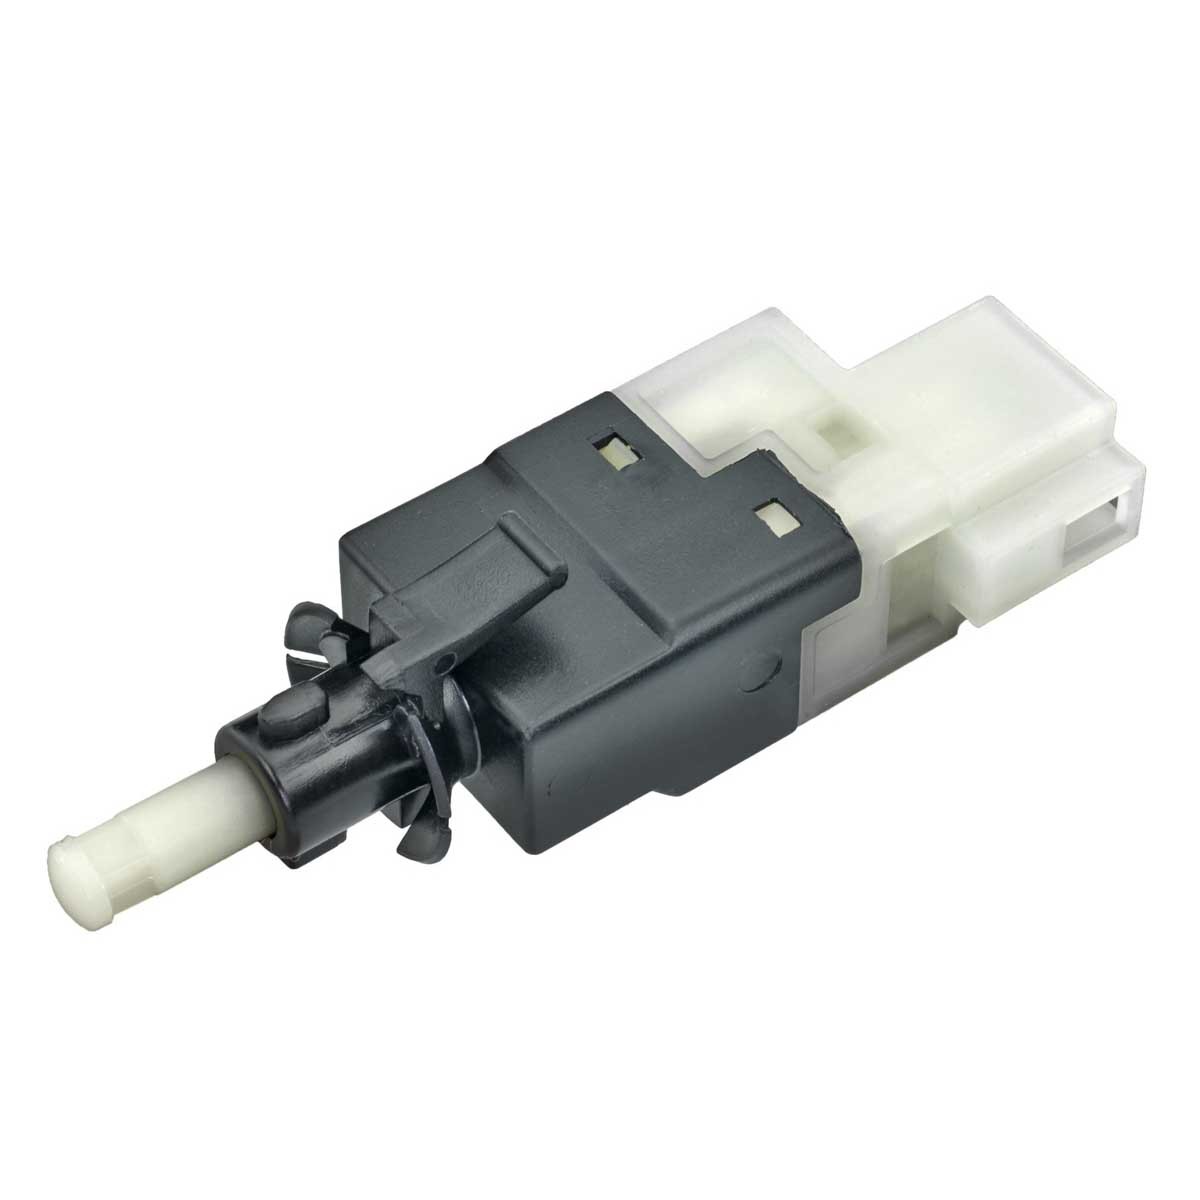 MEX0115 MEYLE Manual (foot operated), 4-pin connector, ORIGINAL Quality Number of pins: 4-pin connector Stop light switch 014 890 0009 buy